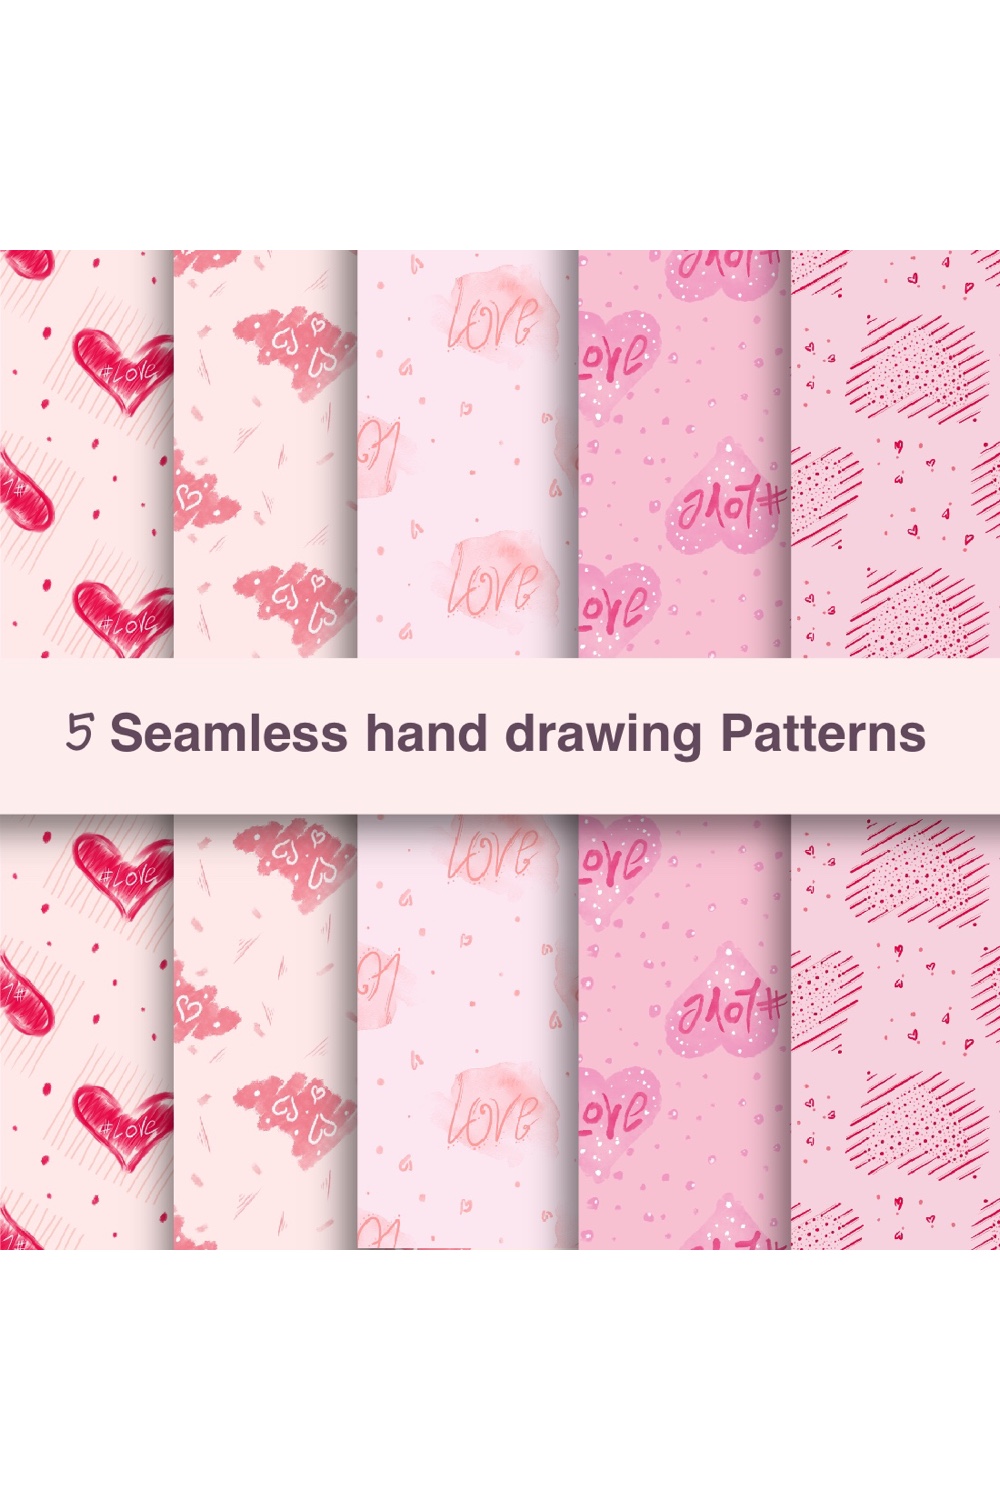 Seamless Hand Drawing Patterns with Health cover.